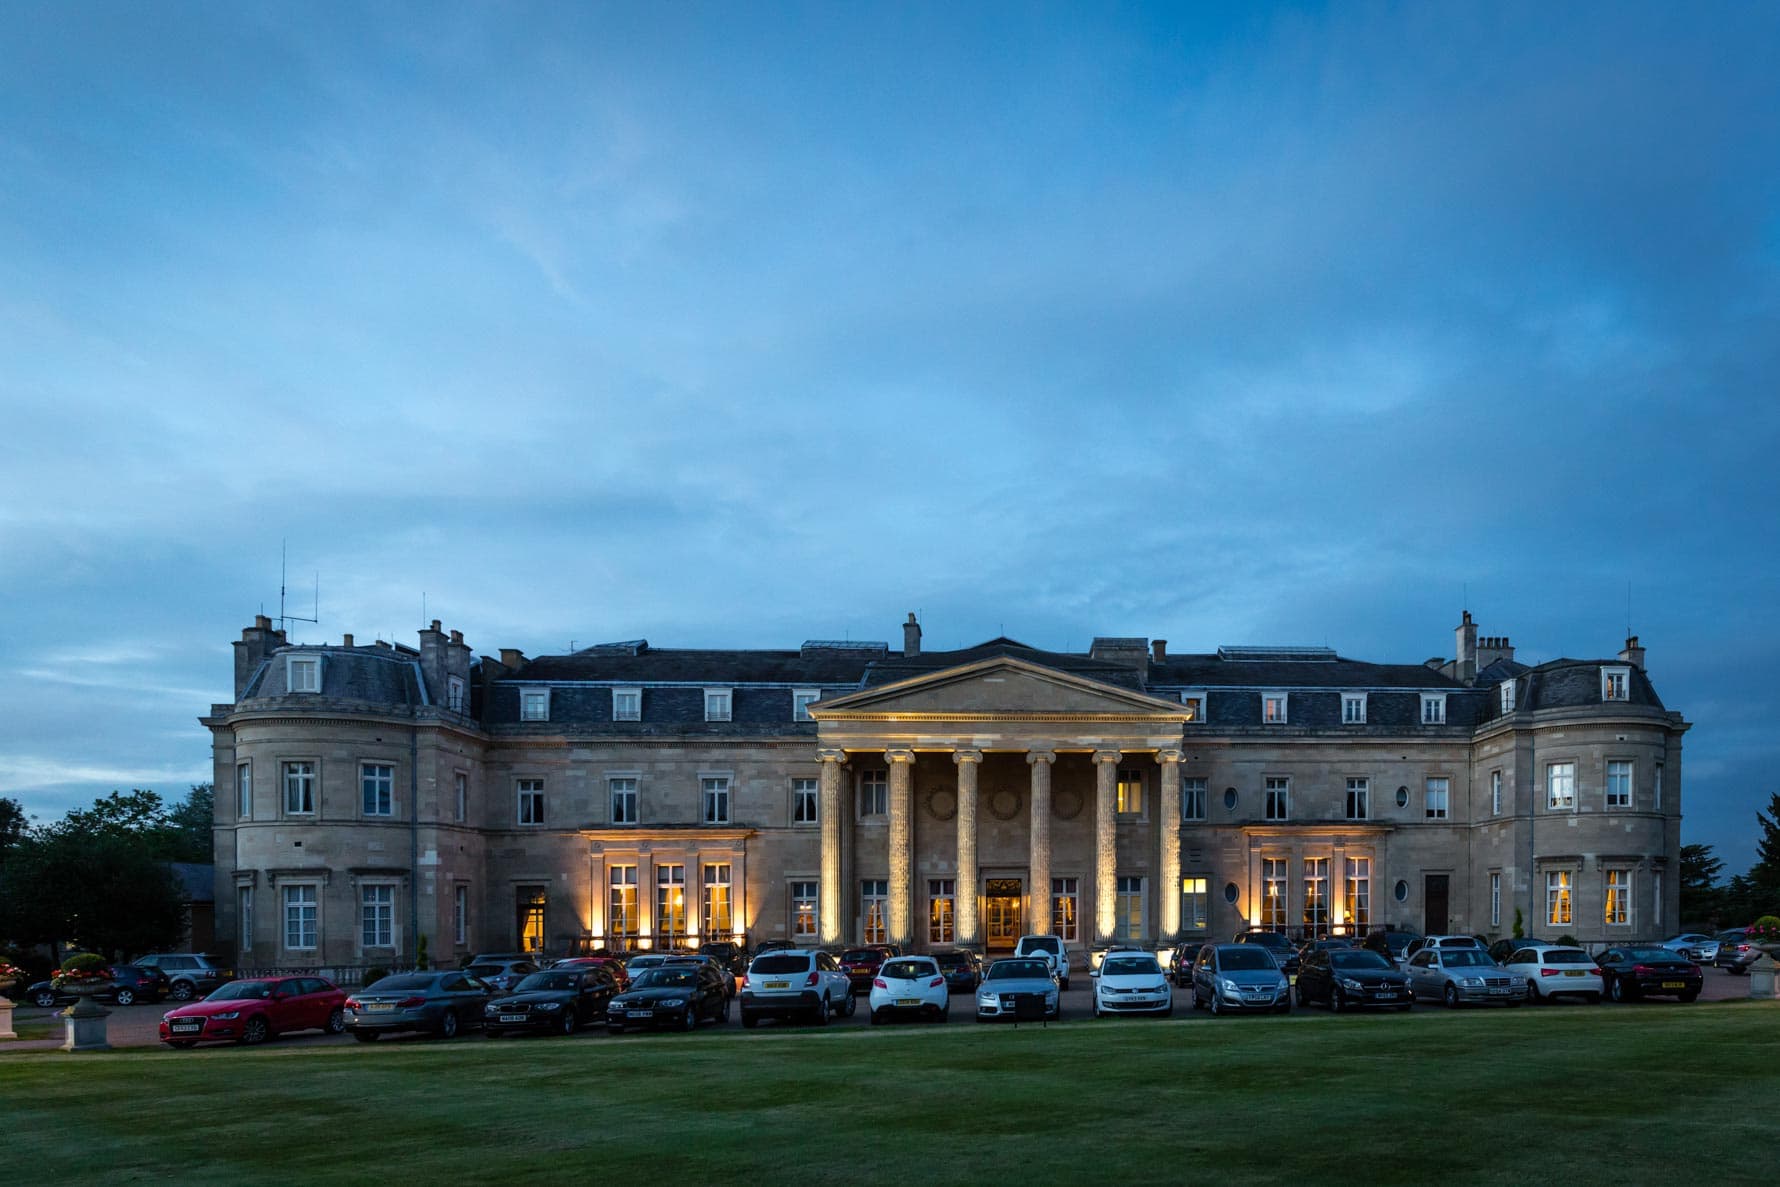 Luton Hoo Hotel in Bedfordshire at dusk